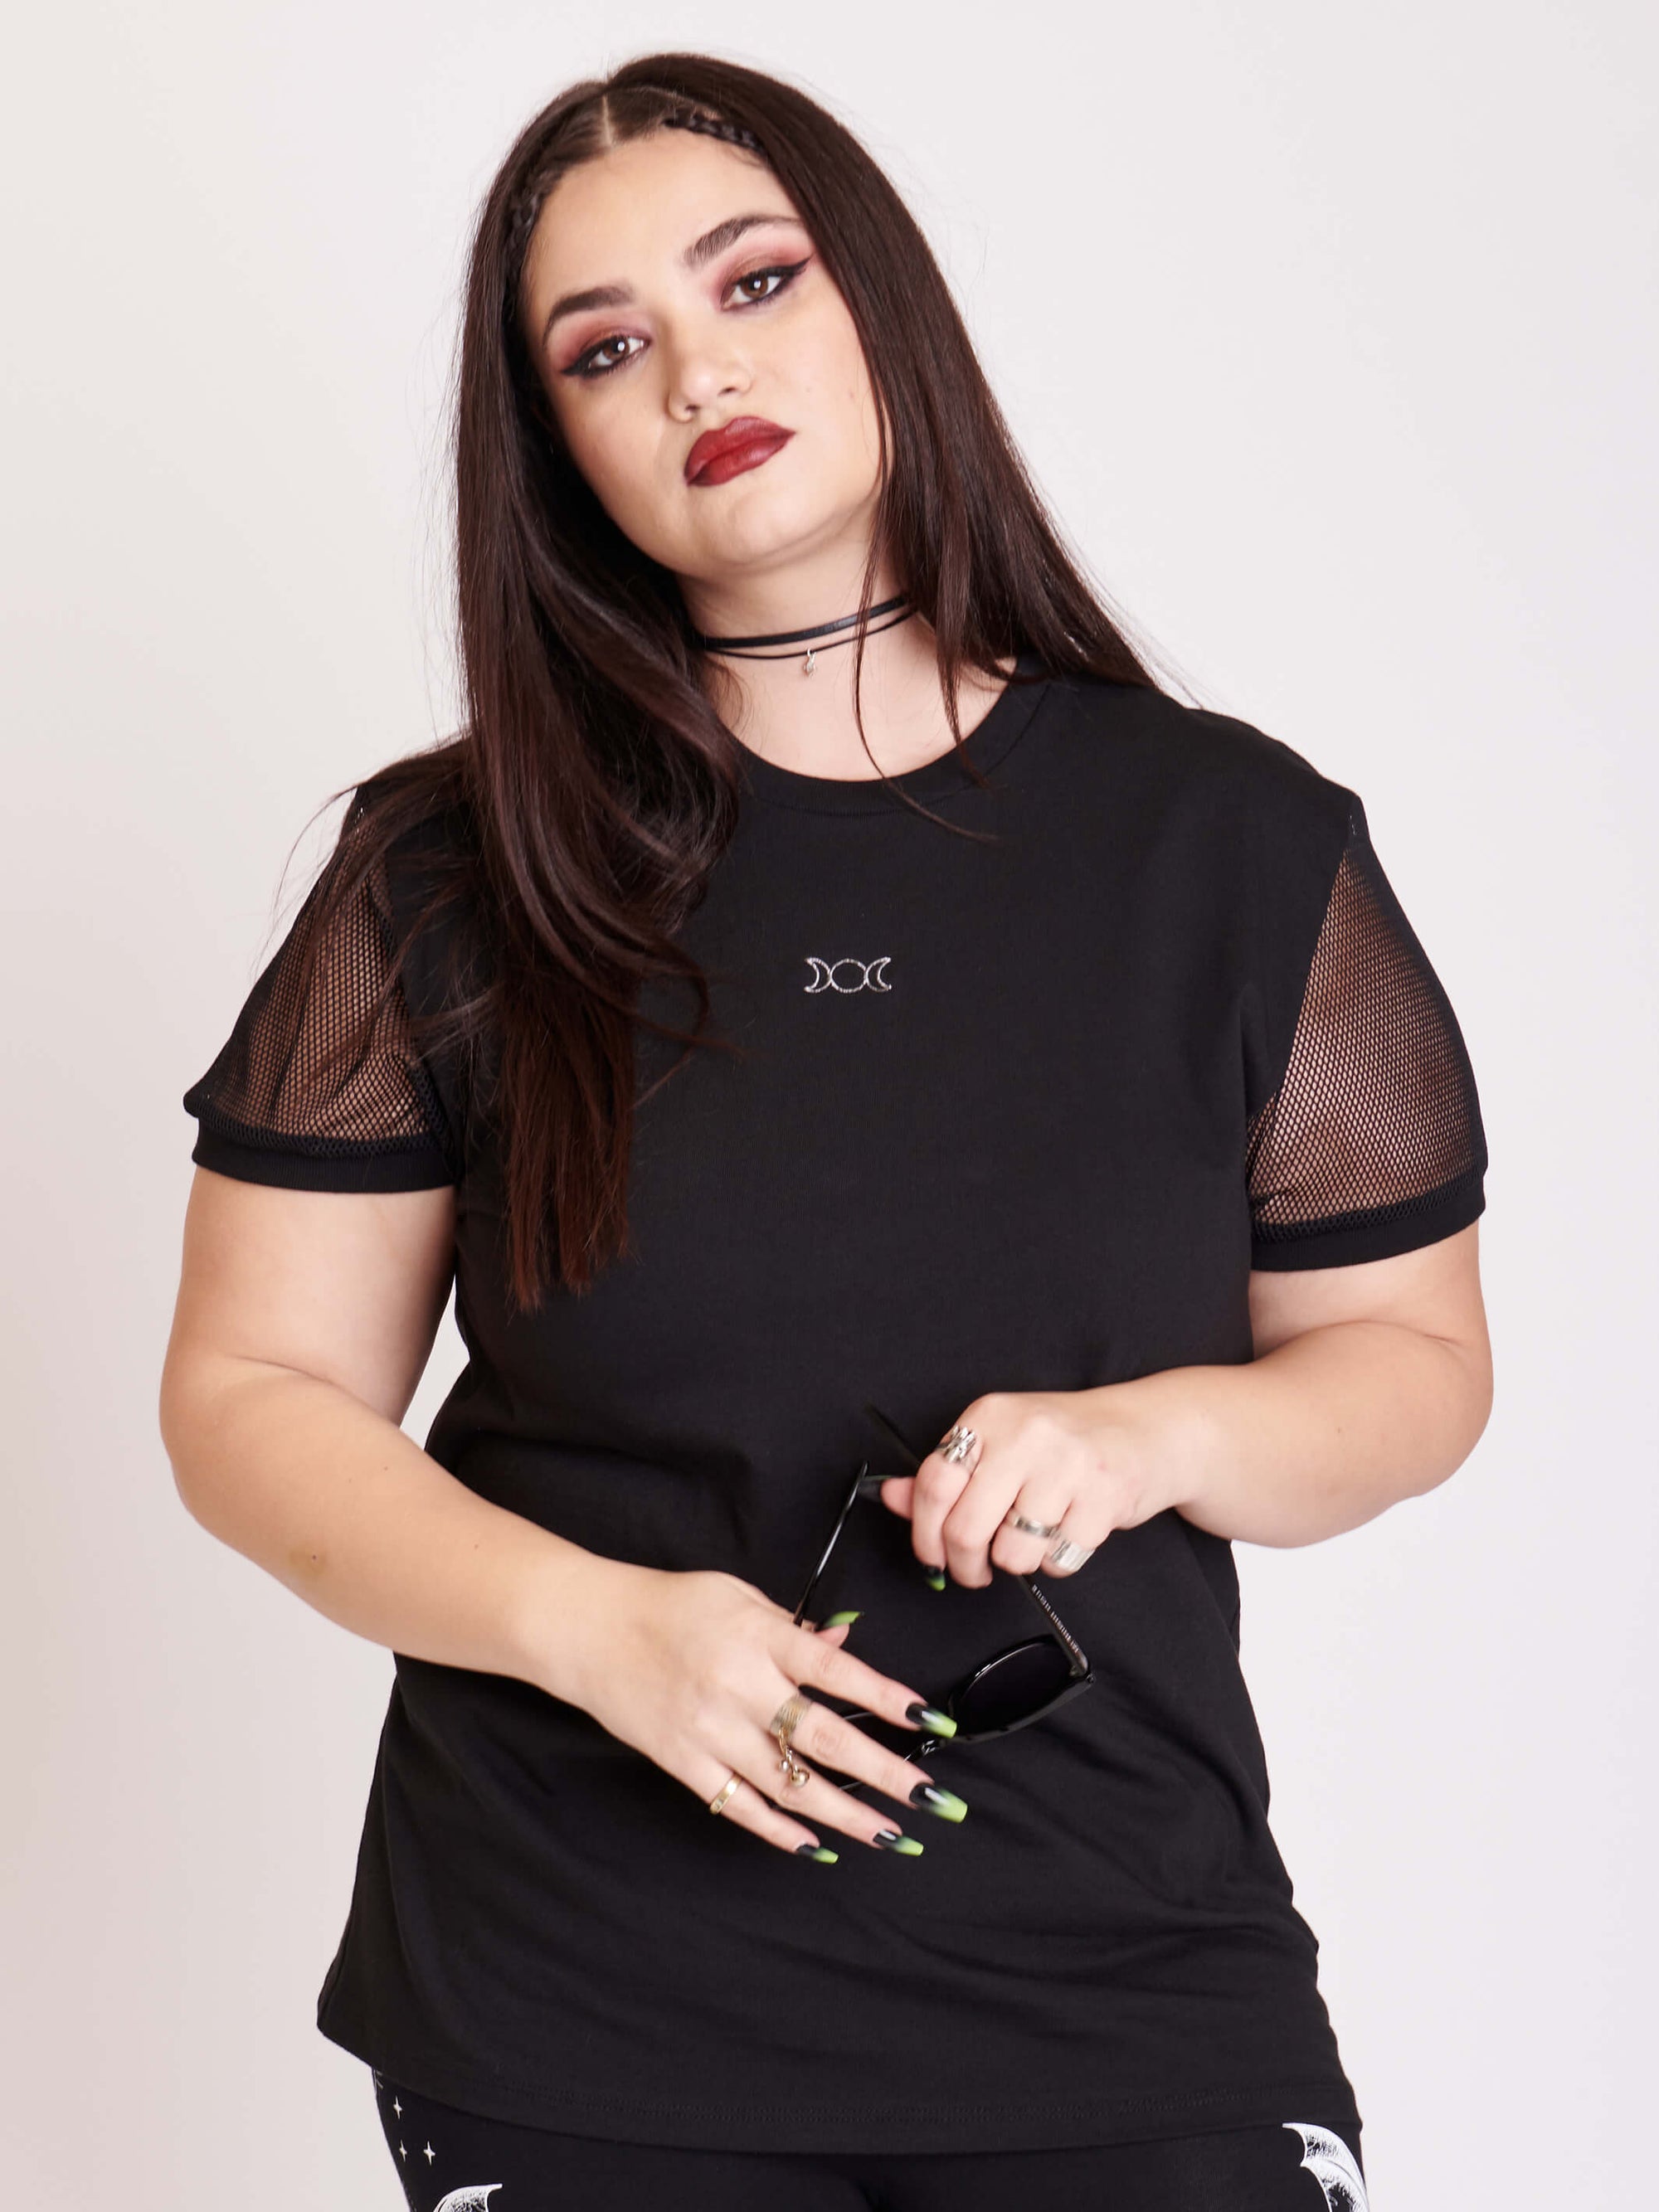 100% cotton unisex fit t-shirt with fishnet sleeve details and metallic triple moon embroidery.